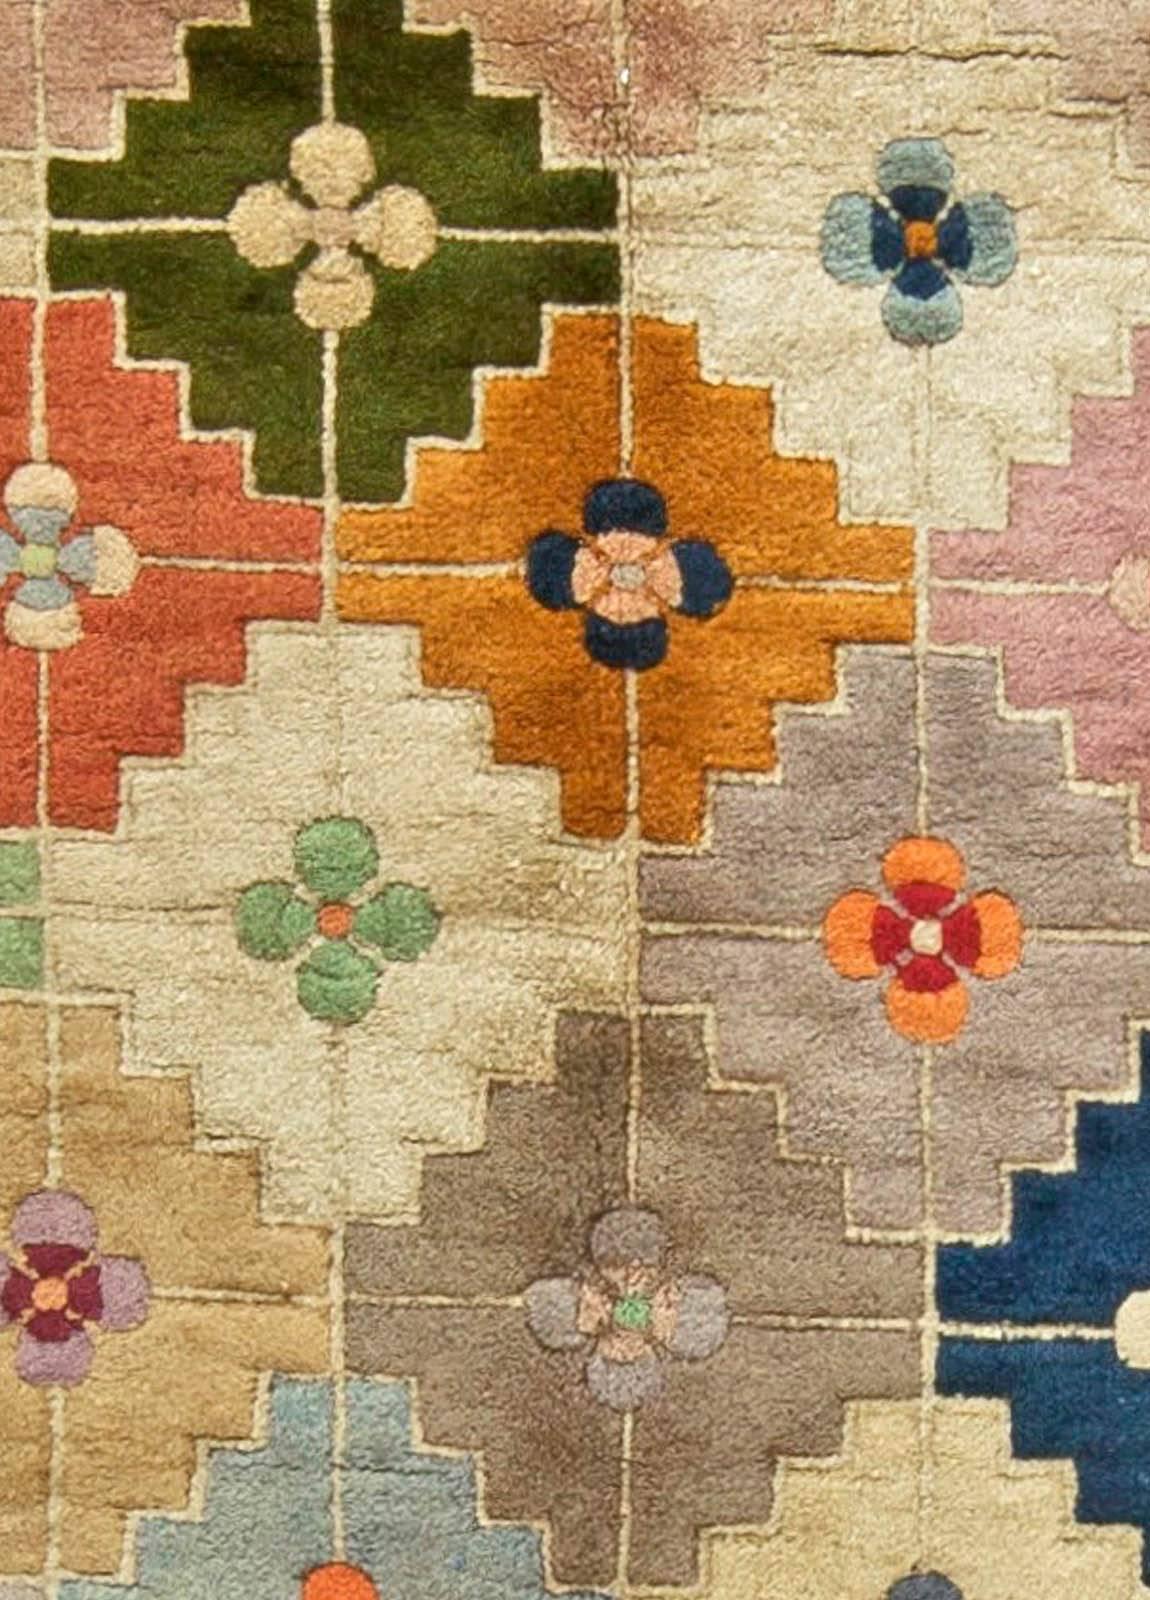 This circa 1940 vintage Chinese Deco rug features an all-over multicolored lozenge field containing floral abstractions, and a border of a lattice that repeats the color scheme of the primary pattern. Featuring shades such as blue, lilac, beige, red